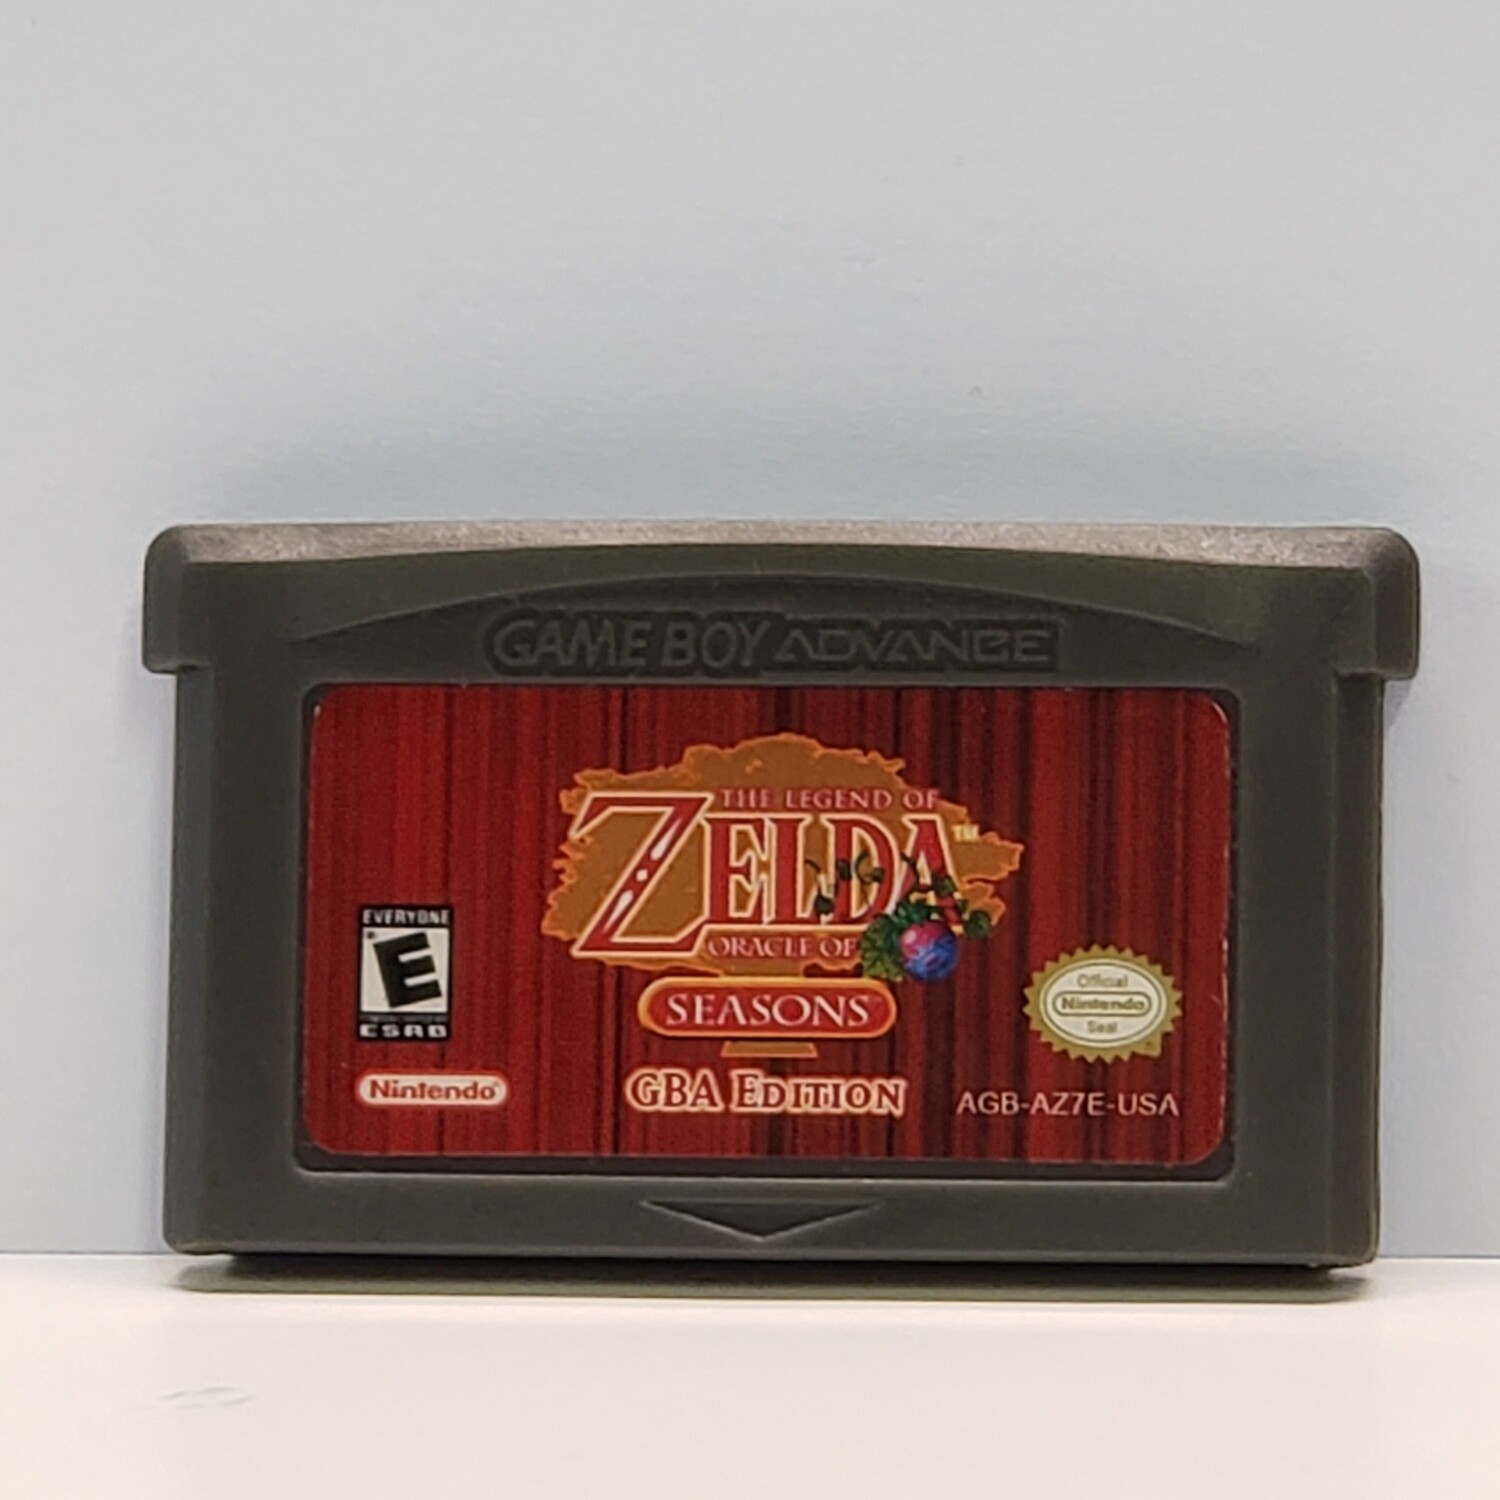 The Legend of Zelda: Oracle of Seasons GBA Edition Video Game for Game Boy  Advance - A